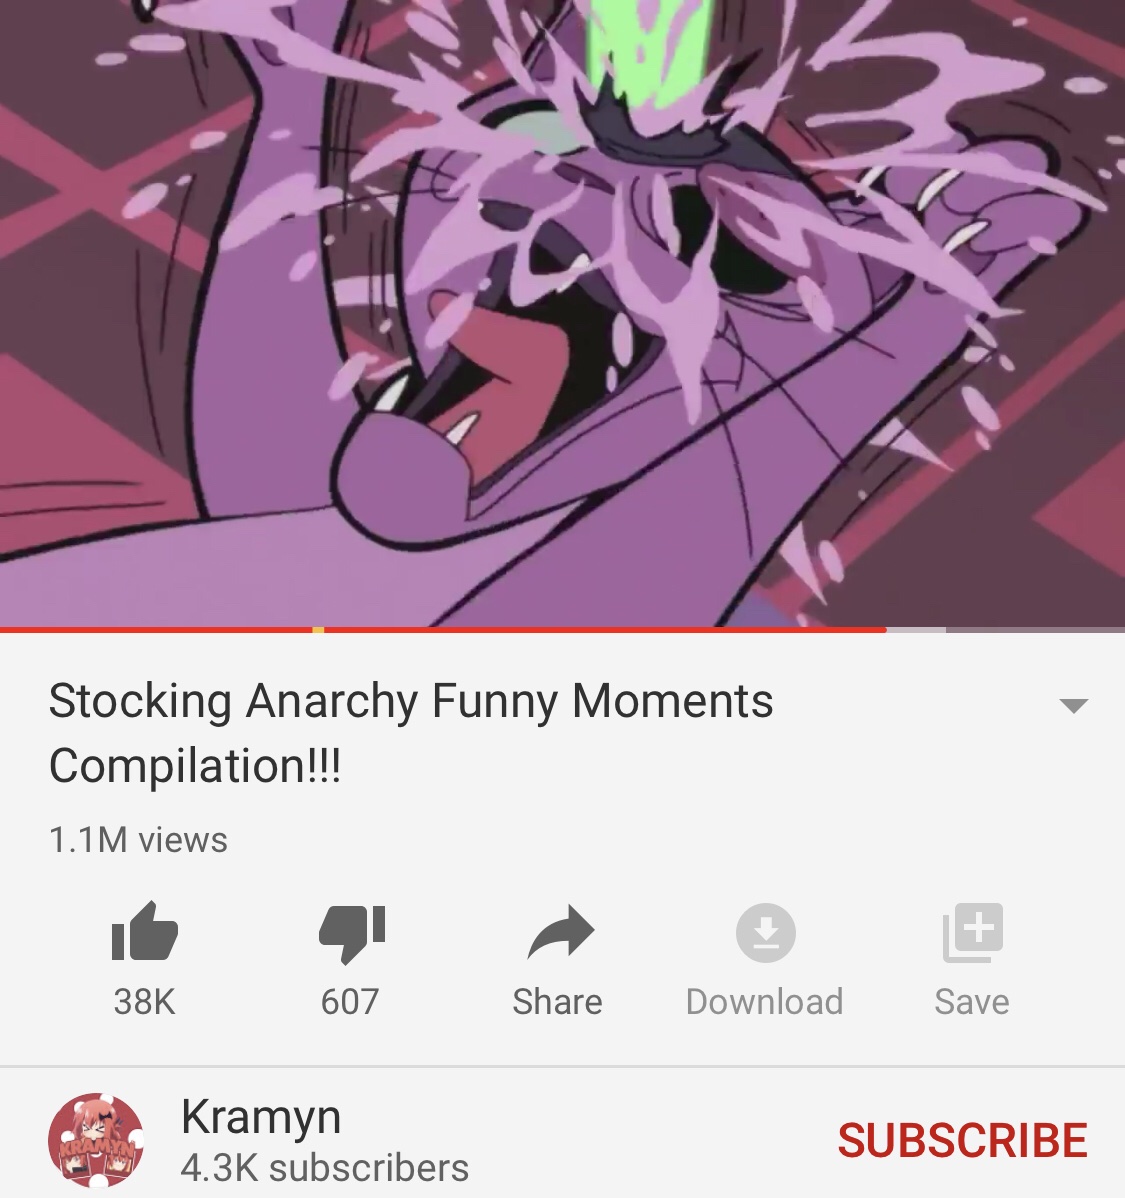 Stocking Anarchy Funny Moments Compilation!!! is a compilation from the Panty & Stocking with Garterbelt anime series which features crude themes and strong language (YouTube - <a href="https://www.youtube.com/watch?v=x9vyysqhLjQ">Stocking Anarchy Funny Moments Compilation!!!</a>)